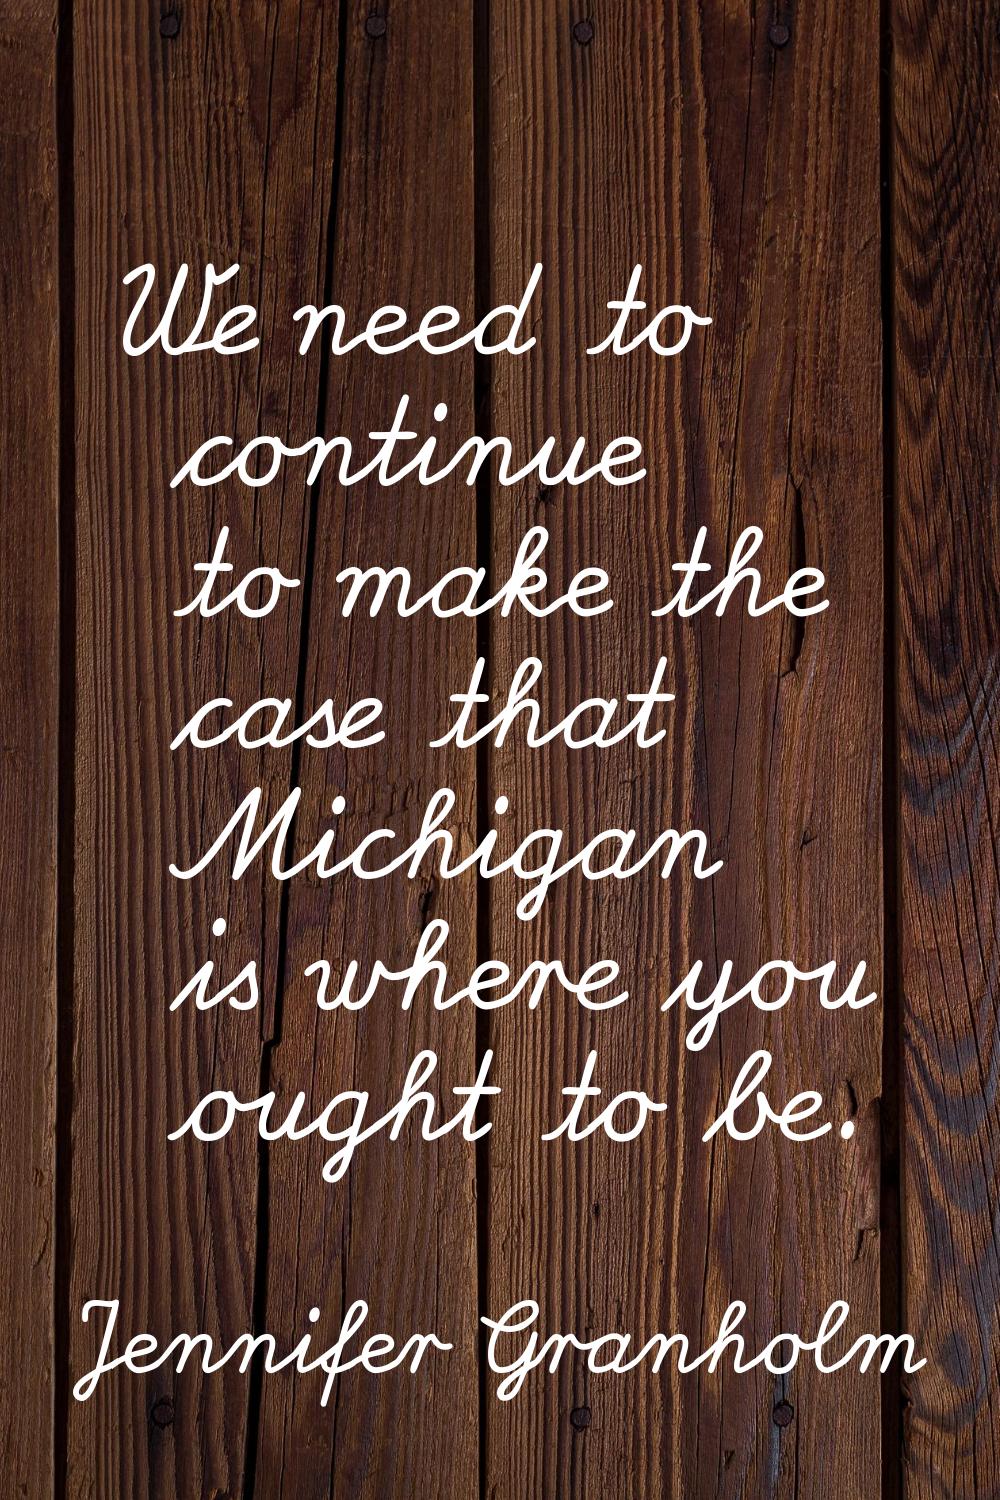 We need to continue to make the case that Michigan is where you ought to be.